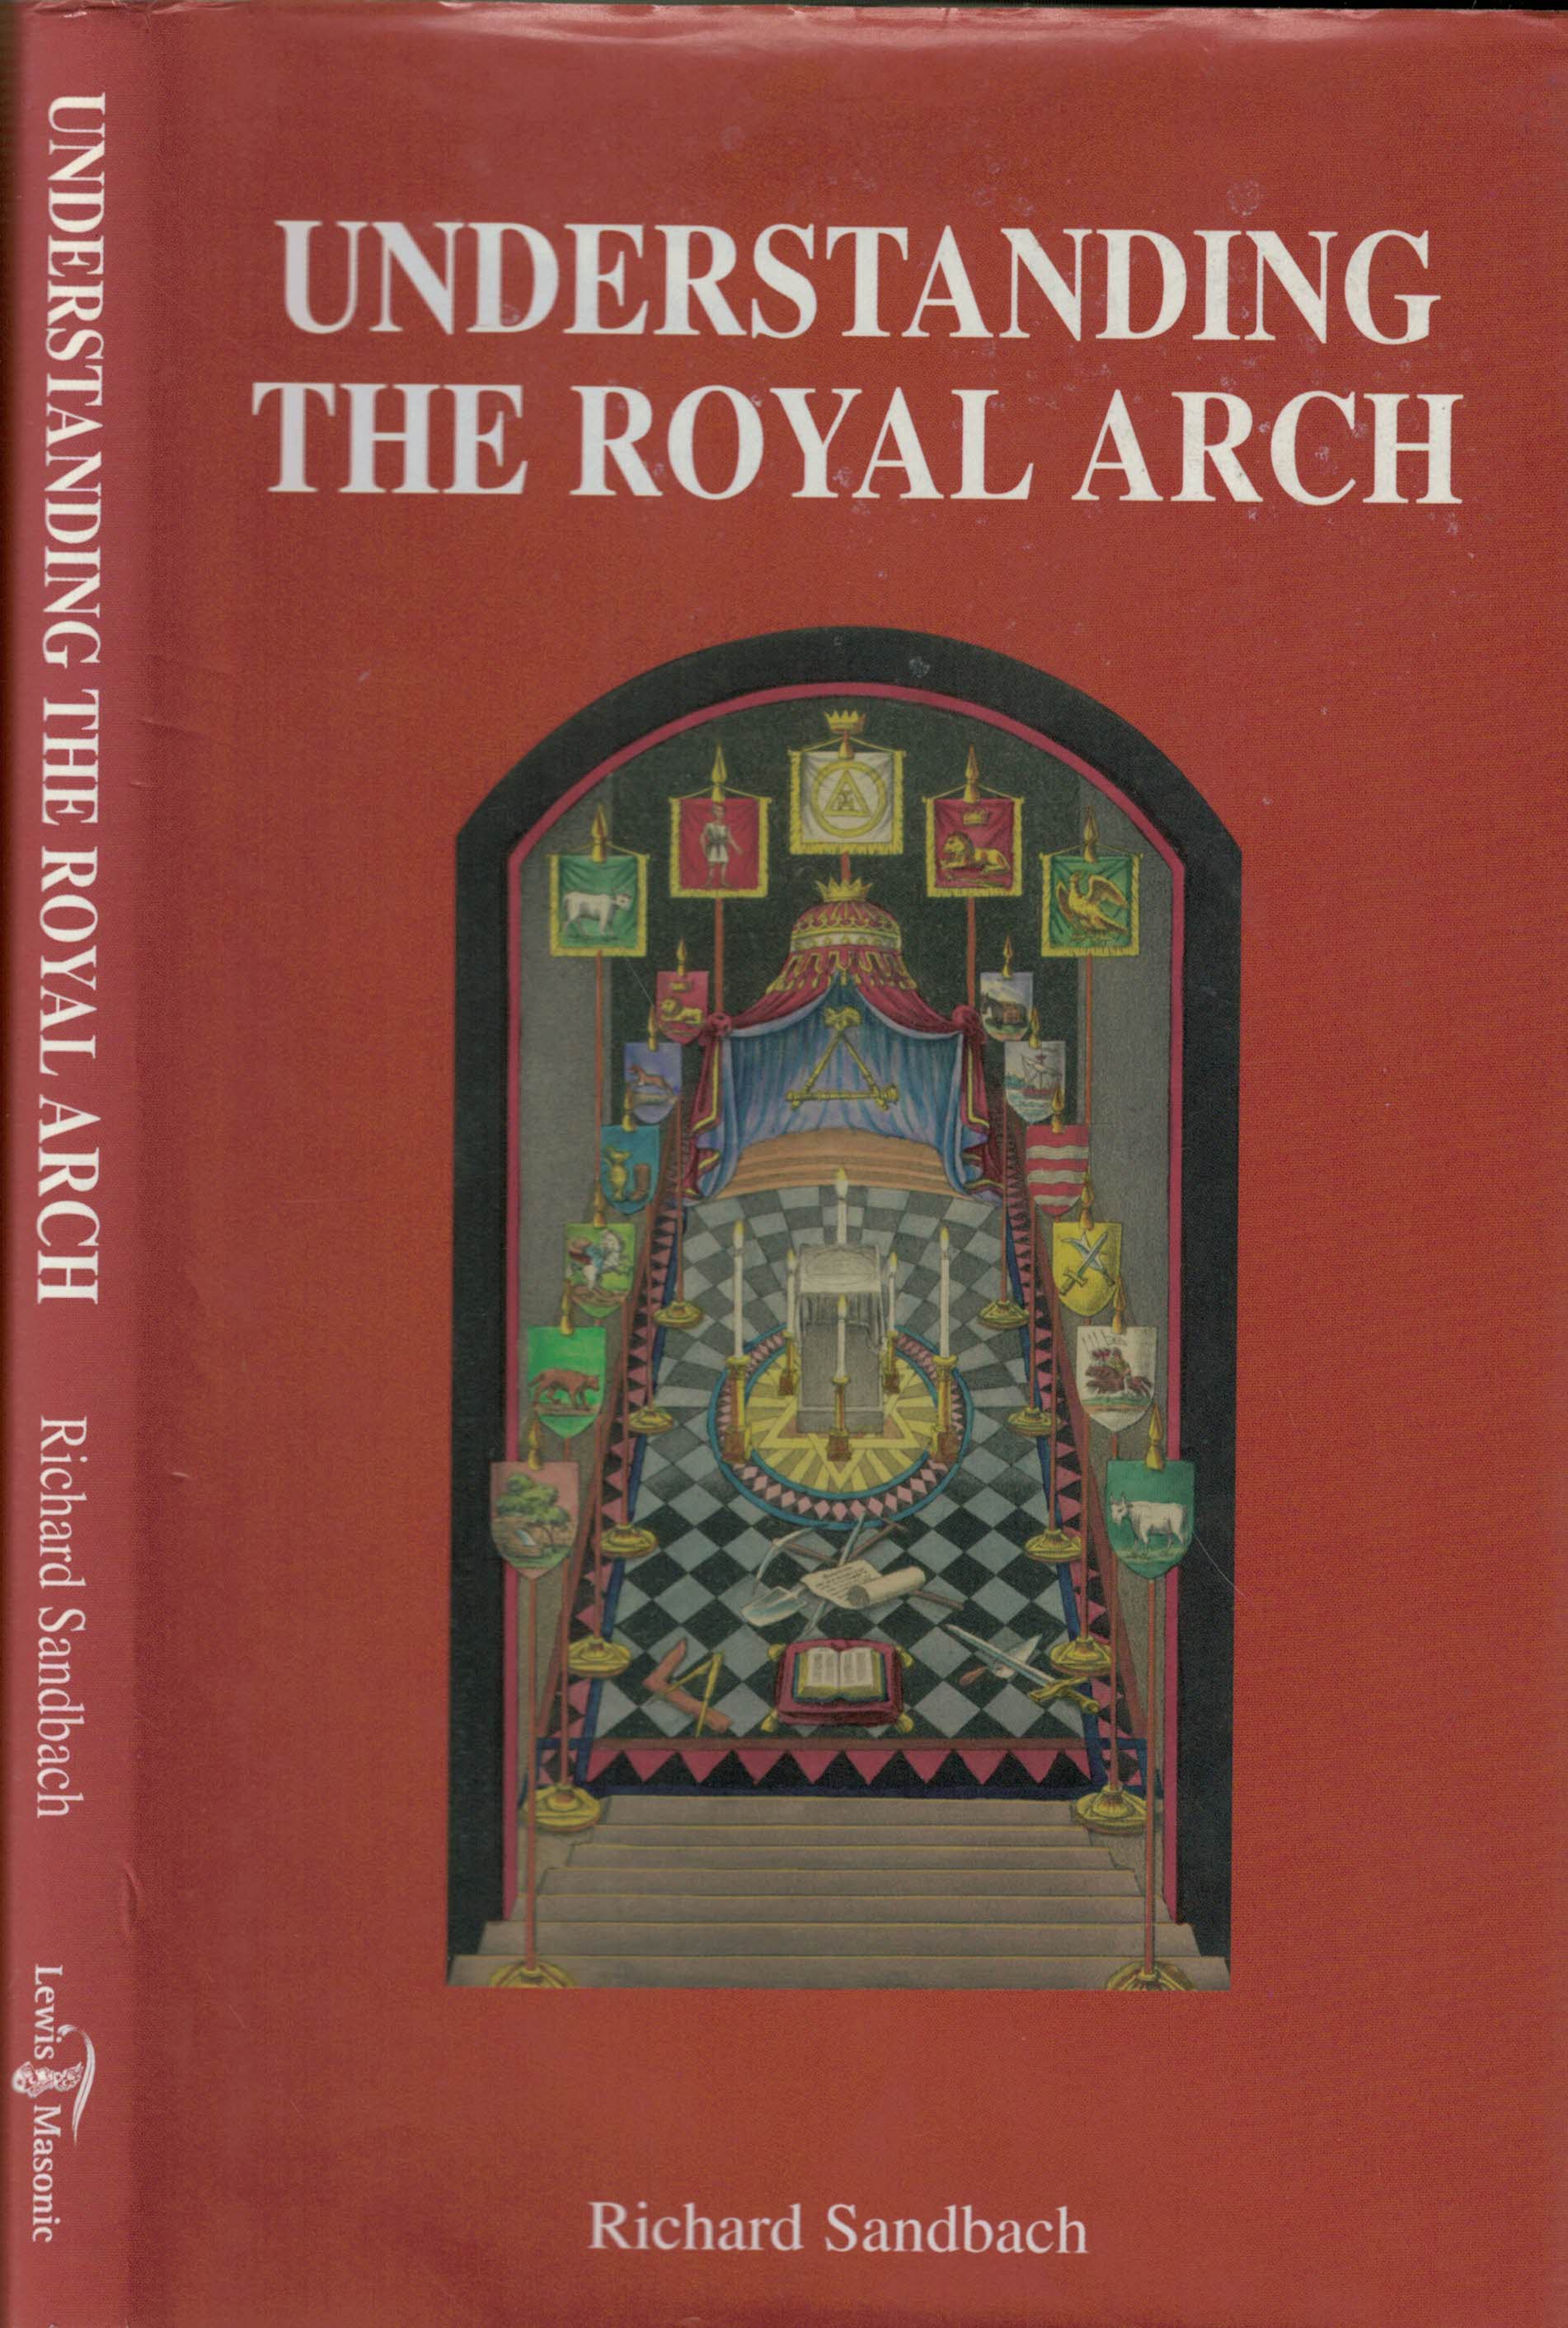 Understanding the Royal Arch